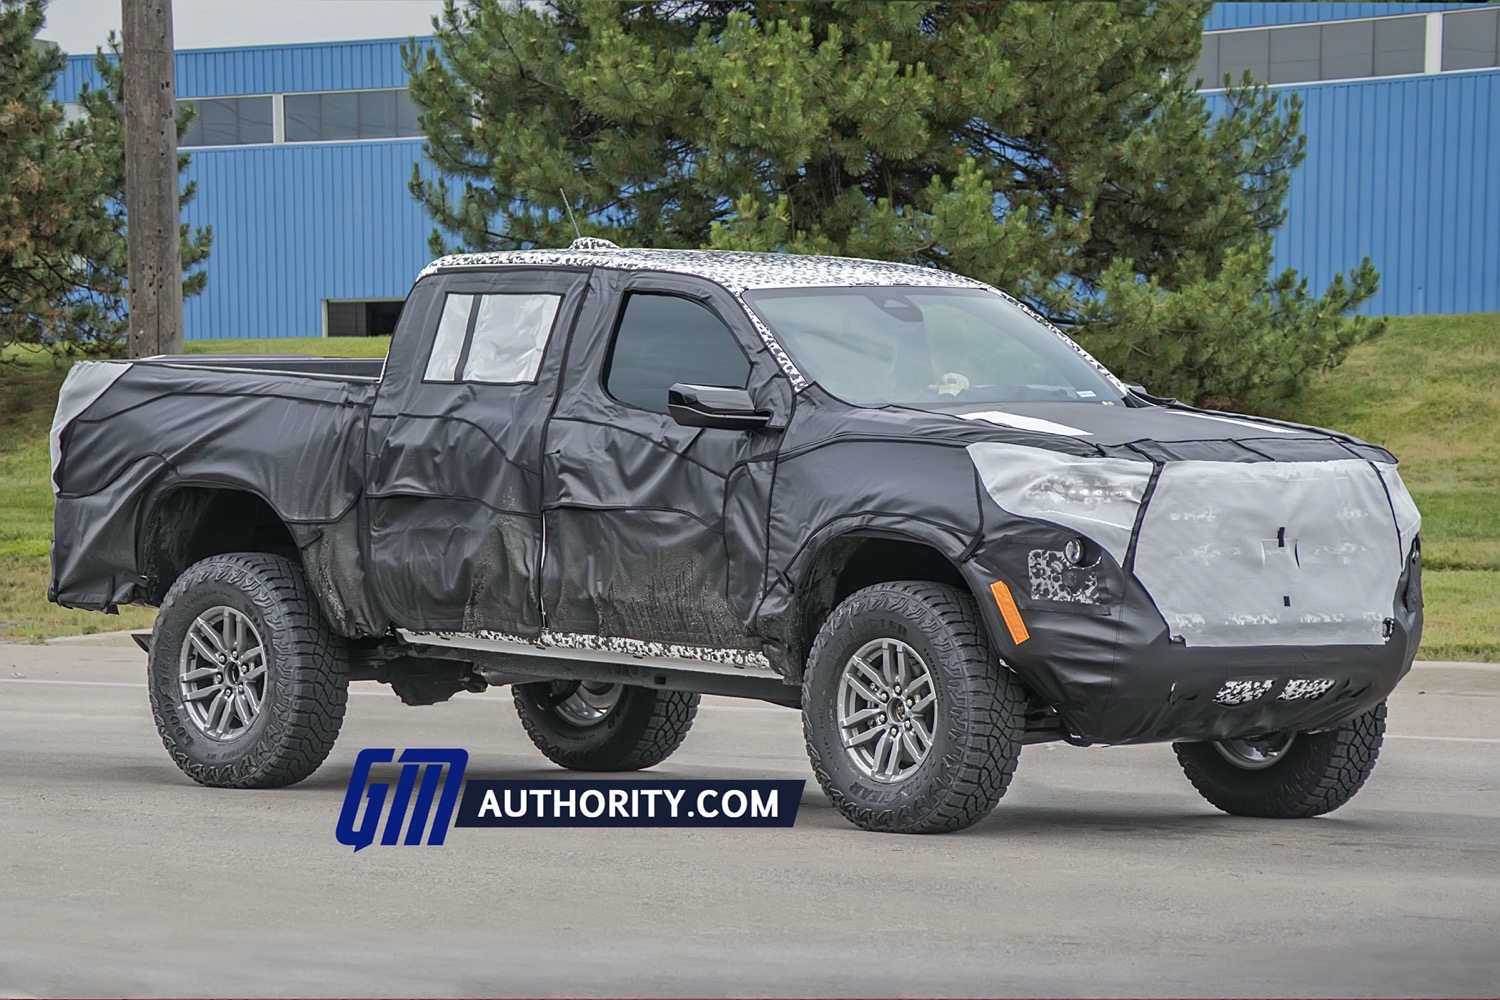 2023-gmc-canyon-at4x-rugged-off-road-pickup-truck-prototype-spy-shots-july-2021-exterior-005